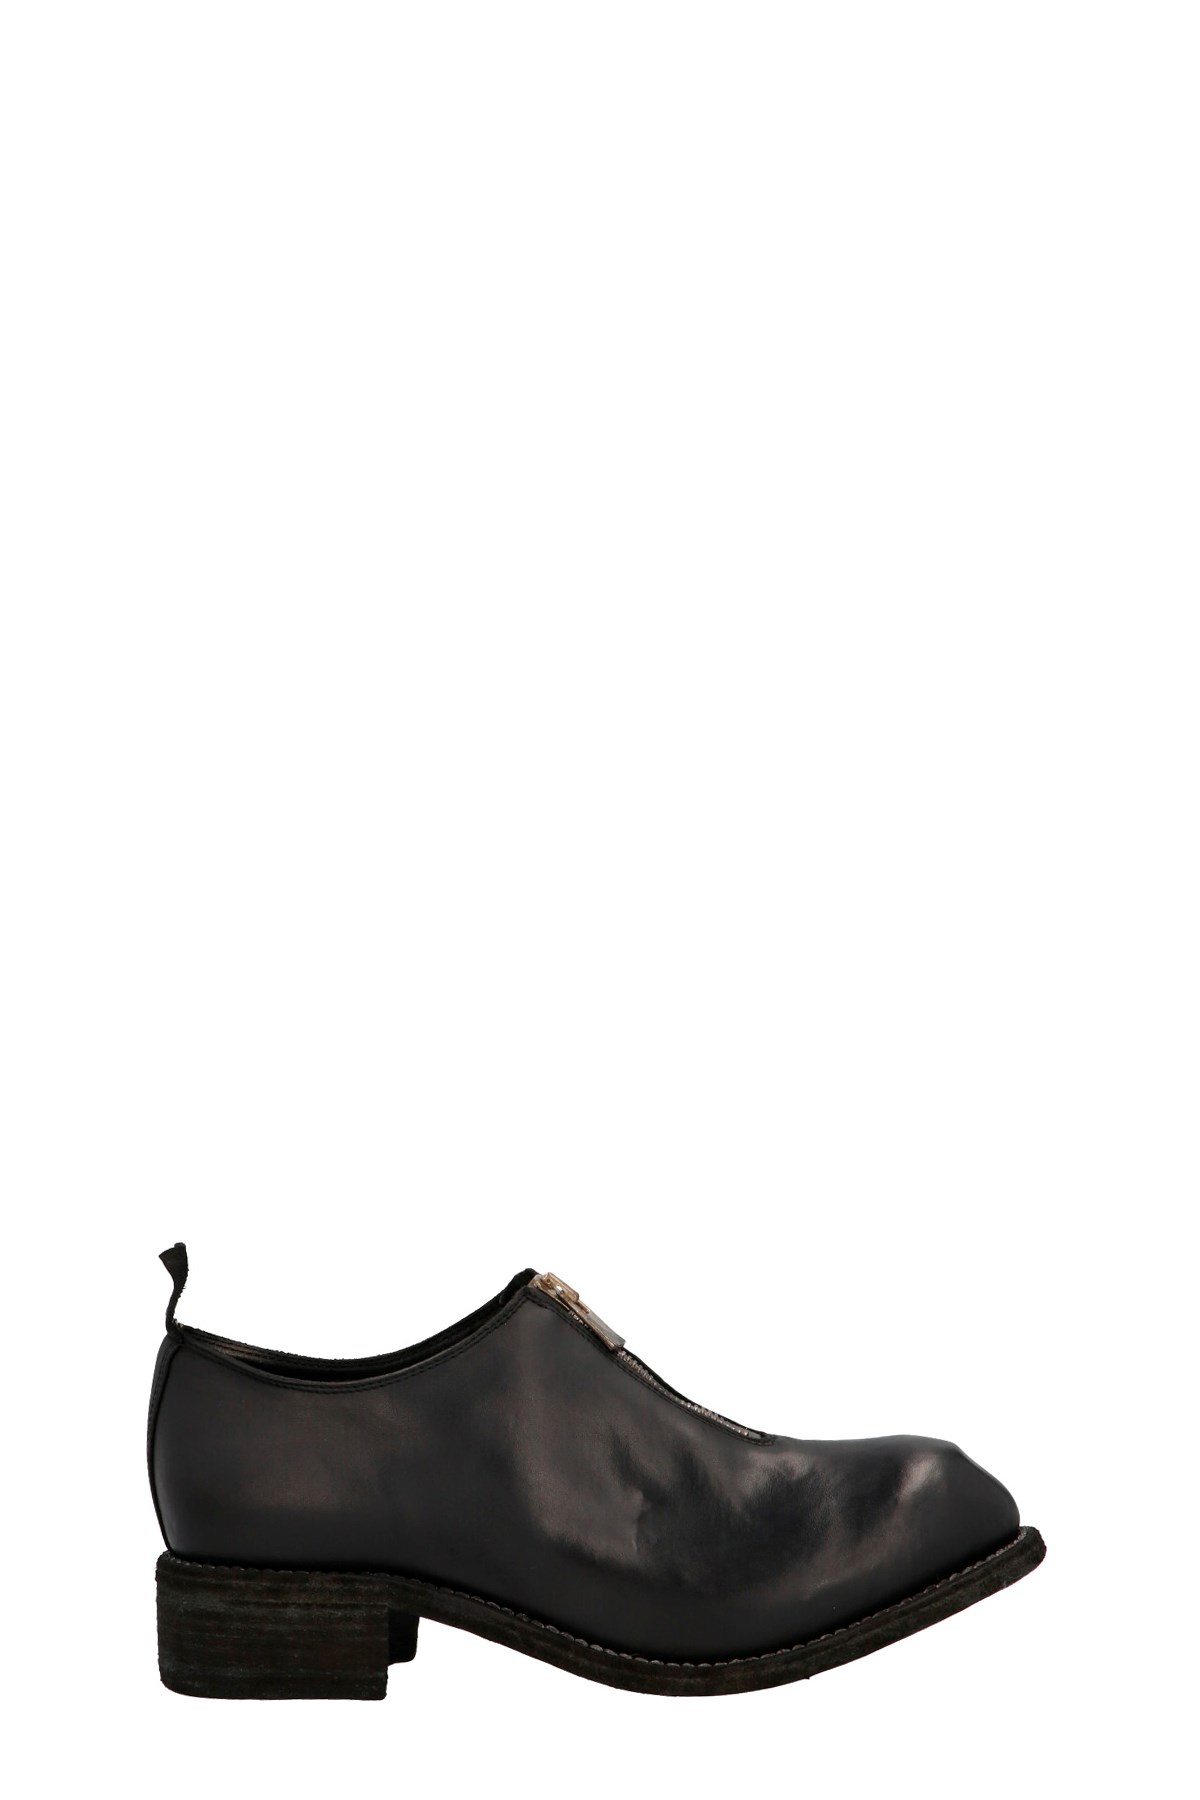 GUIDI Zipped Leather Shoes